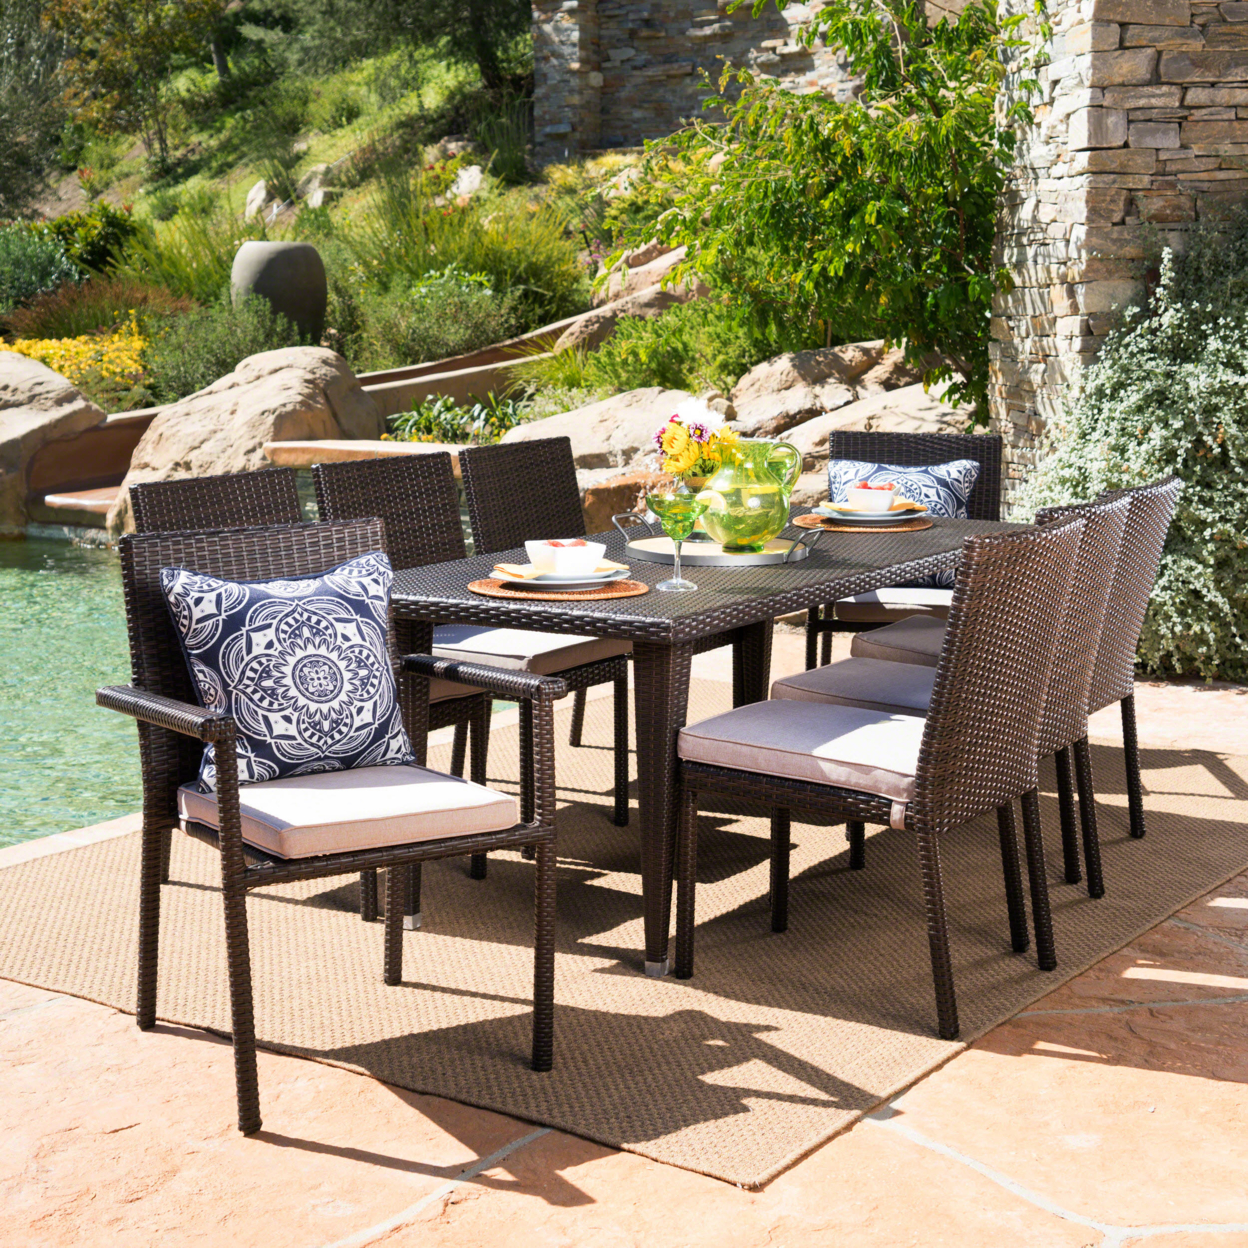 Grand Outdoor 9 Piece Wicker Dining Set With Water Resistant Cushions - Multi-brown/Textured Beige